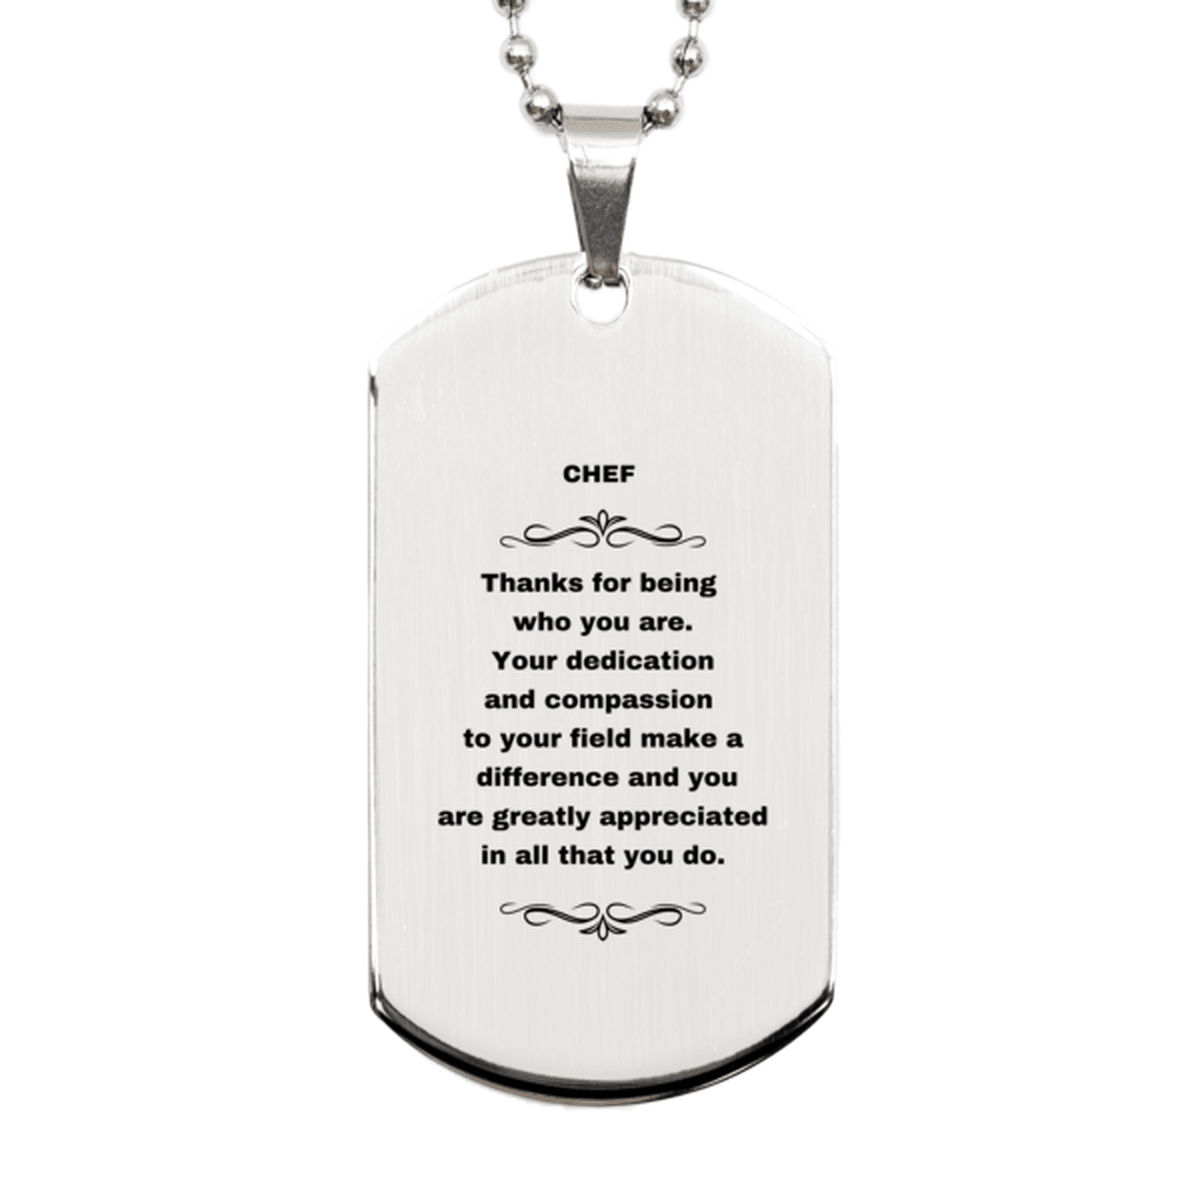 Chef Silver Dog Tag Engraved Necklace - Thanks for being who you are - Birthday Christmas Jewelry Gifts Coworkers Colleague Boss - Mallard Moon Gift Shop